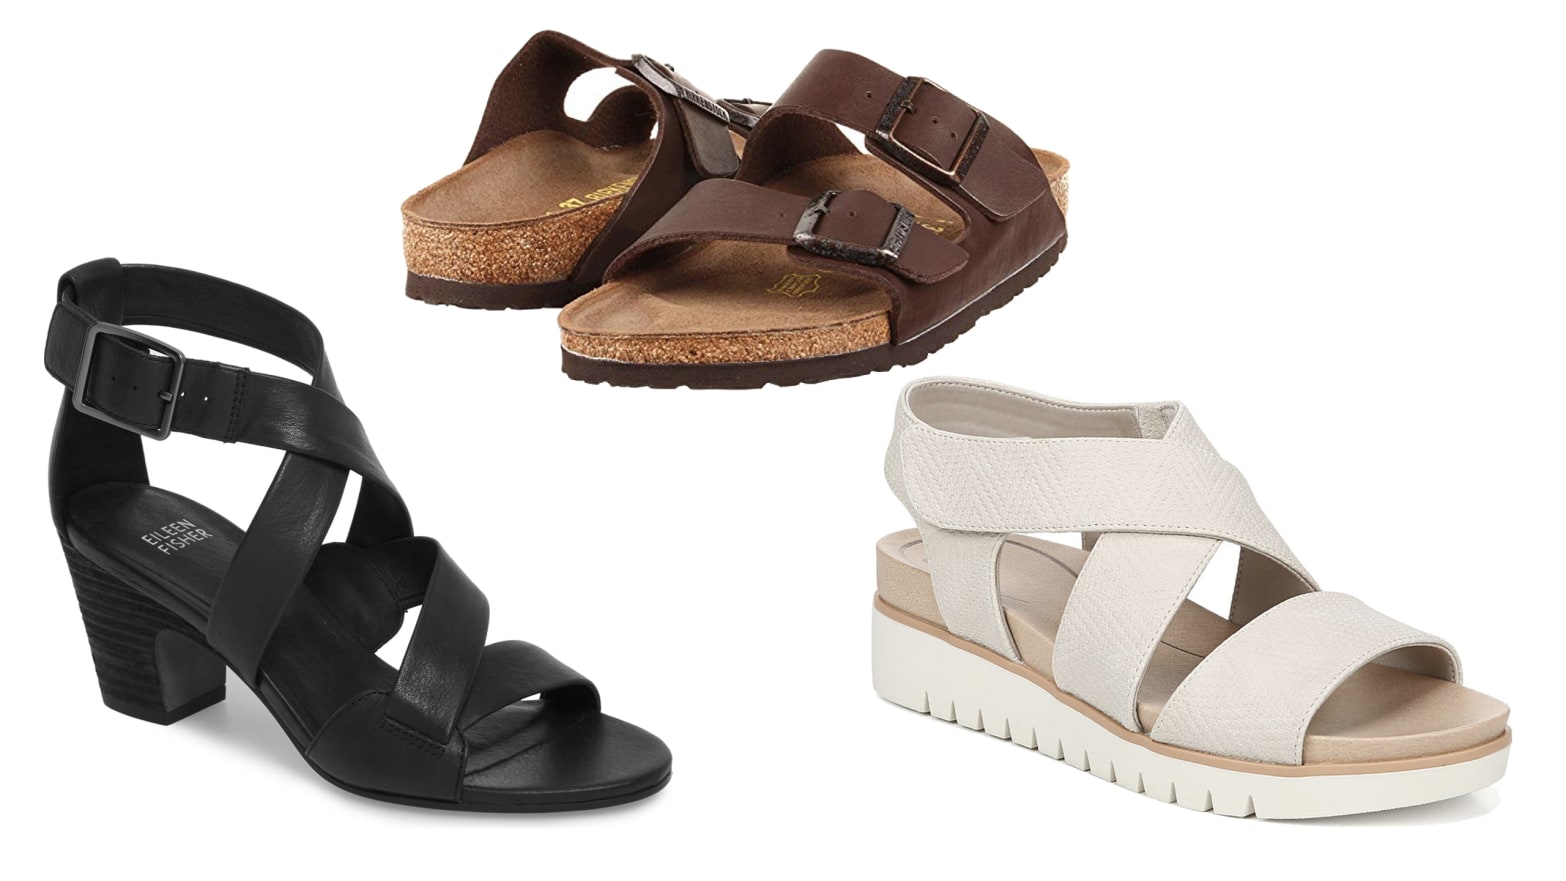 most supportive sandals